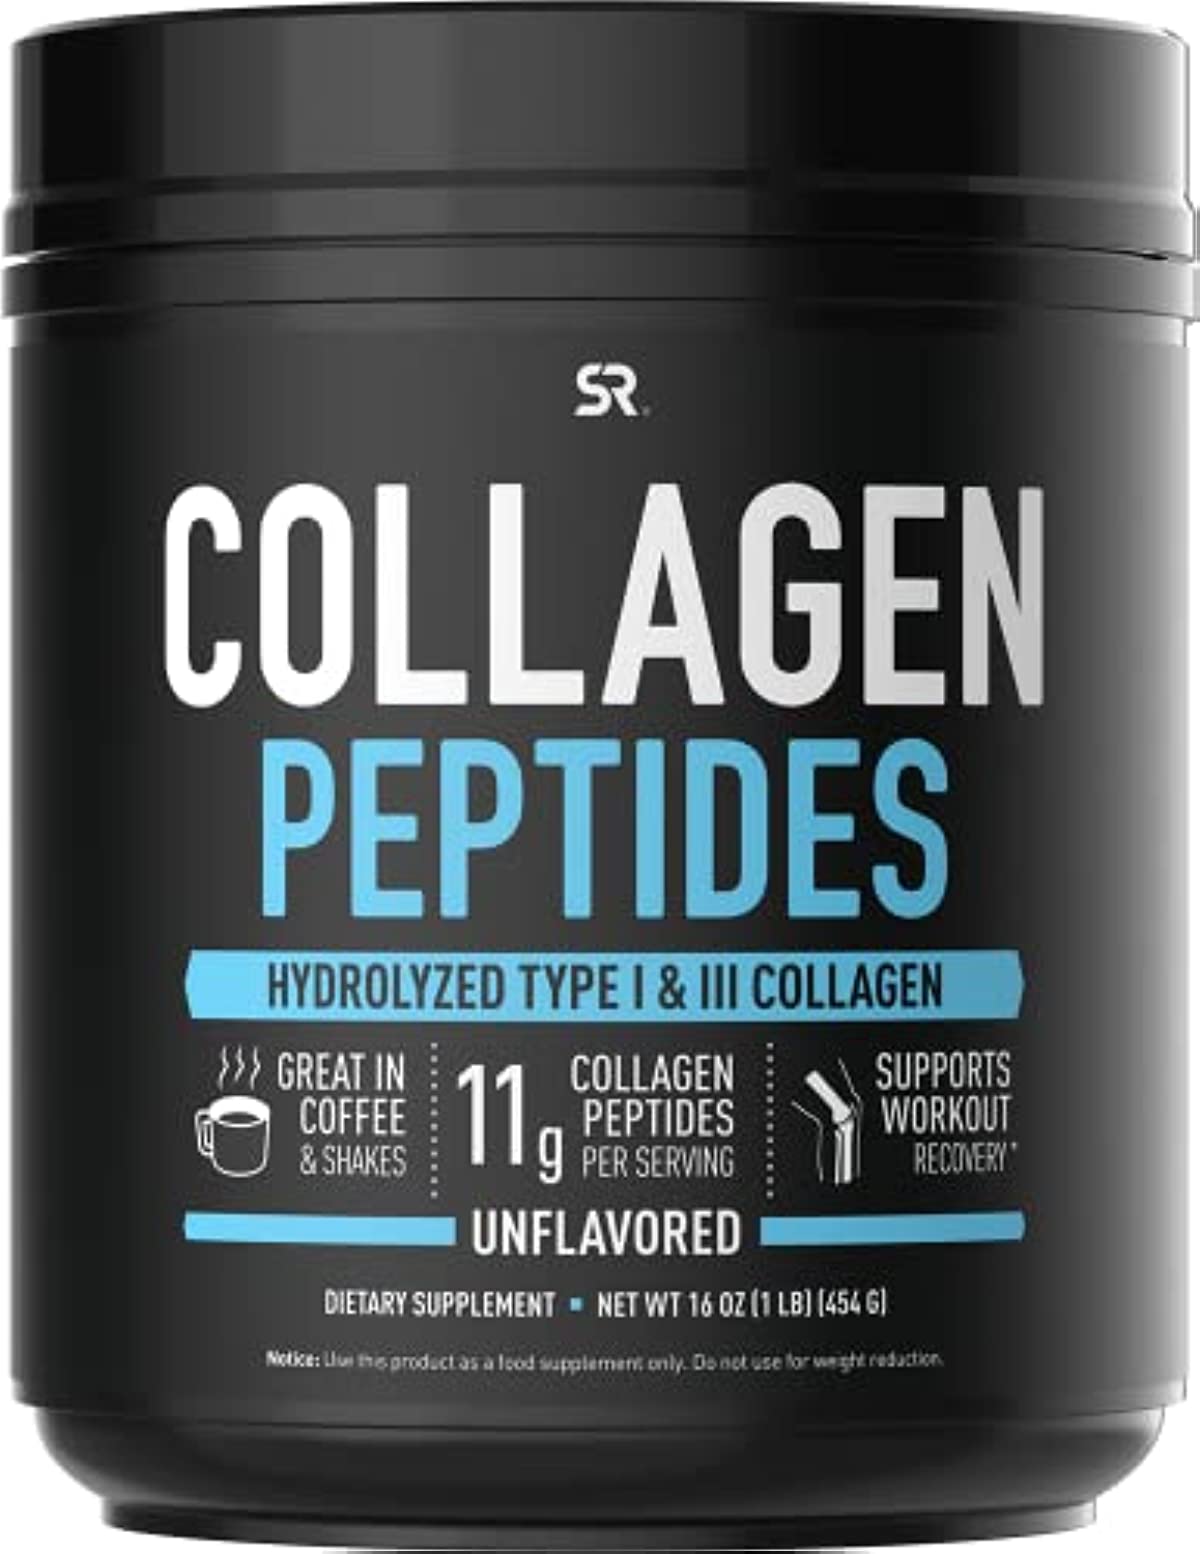 Sports Research Collagen Powder Supplement - Vital for Workout Recovery, Skin, & Nails - Hydrolyzed Protein Peptides - Great Keto Friendly Nutrition for Men & Women - Mix in Drinks (16 Oz)